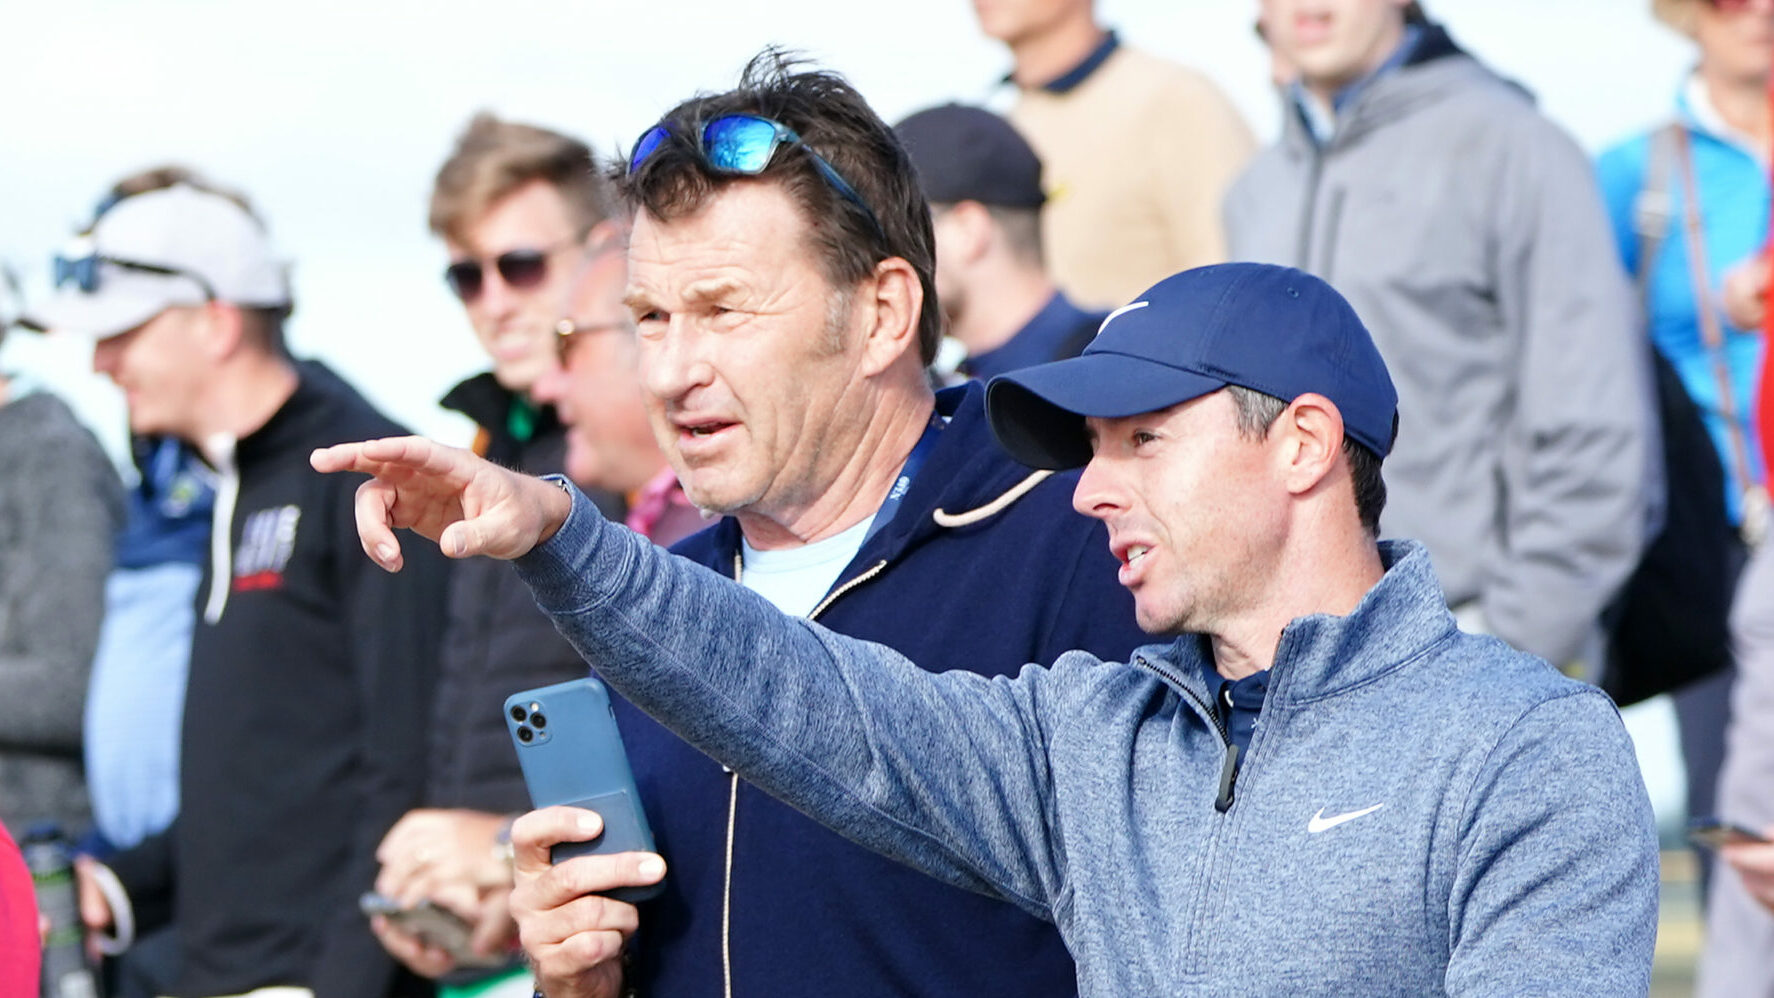 Nick Faldo believes Rory McIlroy has at least another decade of Masters chances